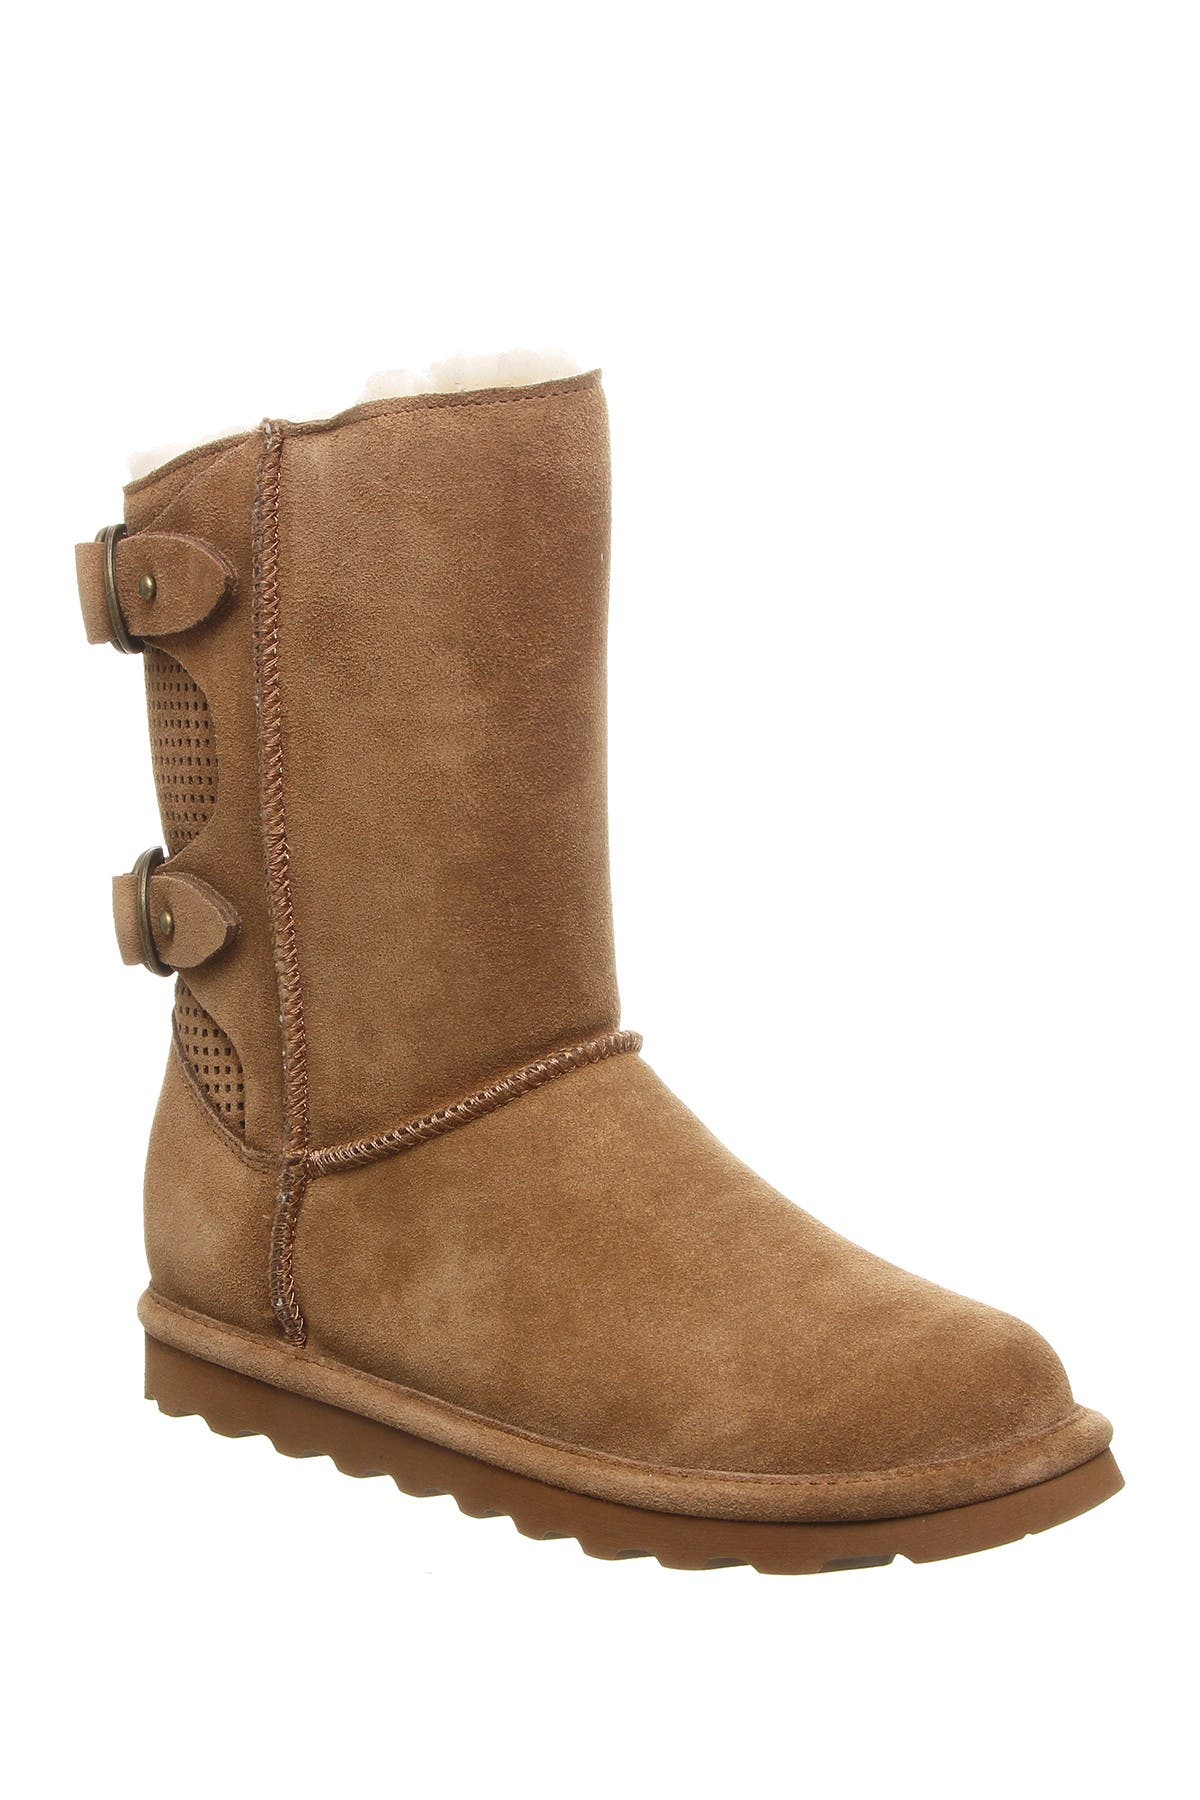 tan uggs with bows on the back